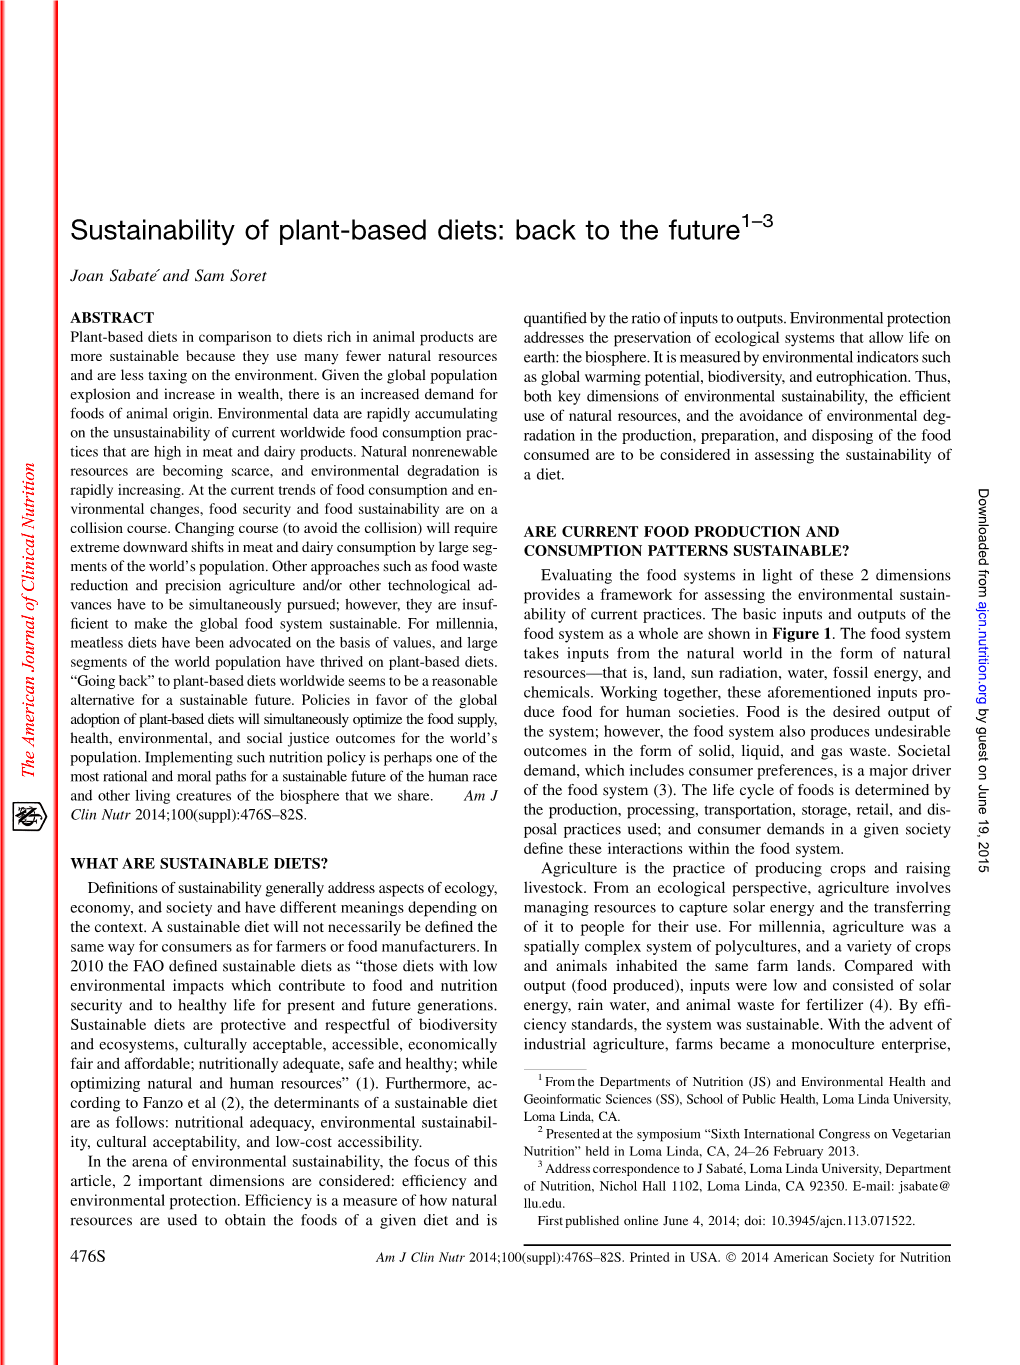 Sustainability of Plant-Based Diets: Back to the Future1–3